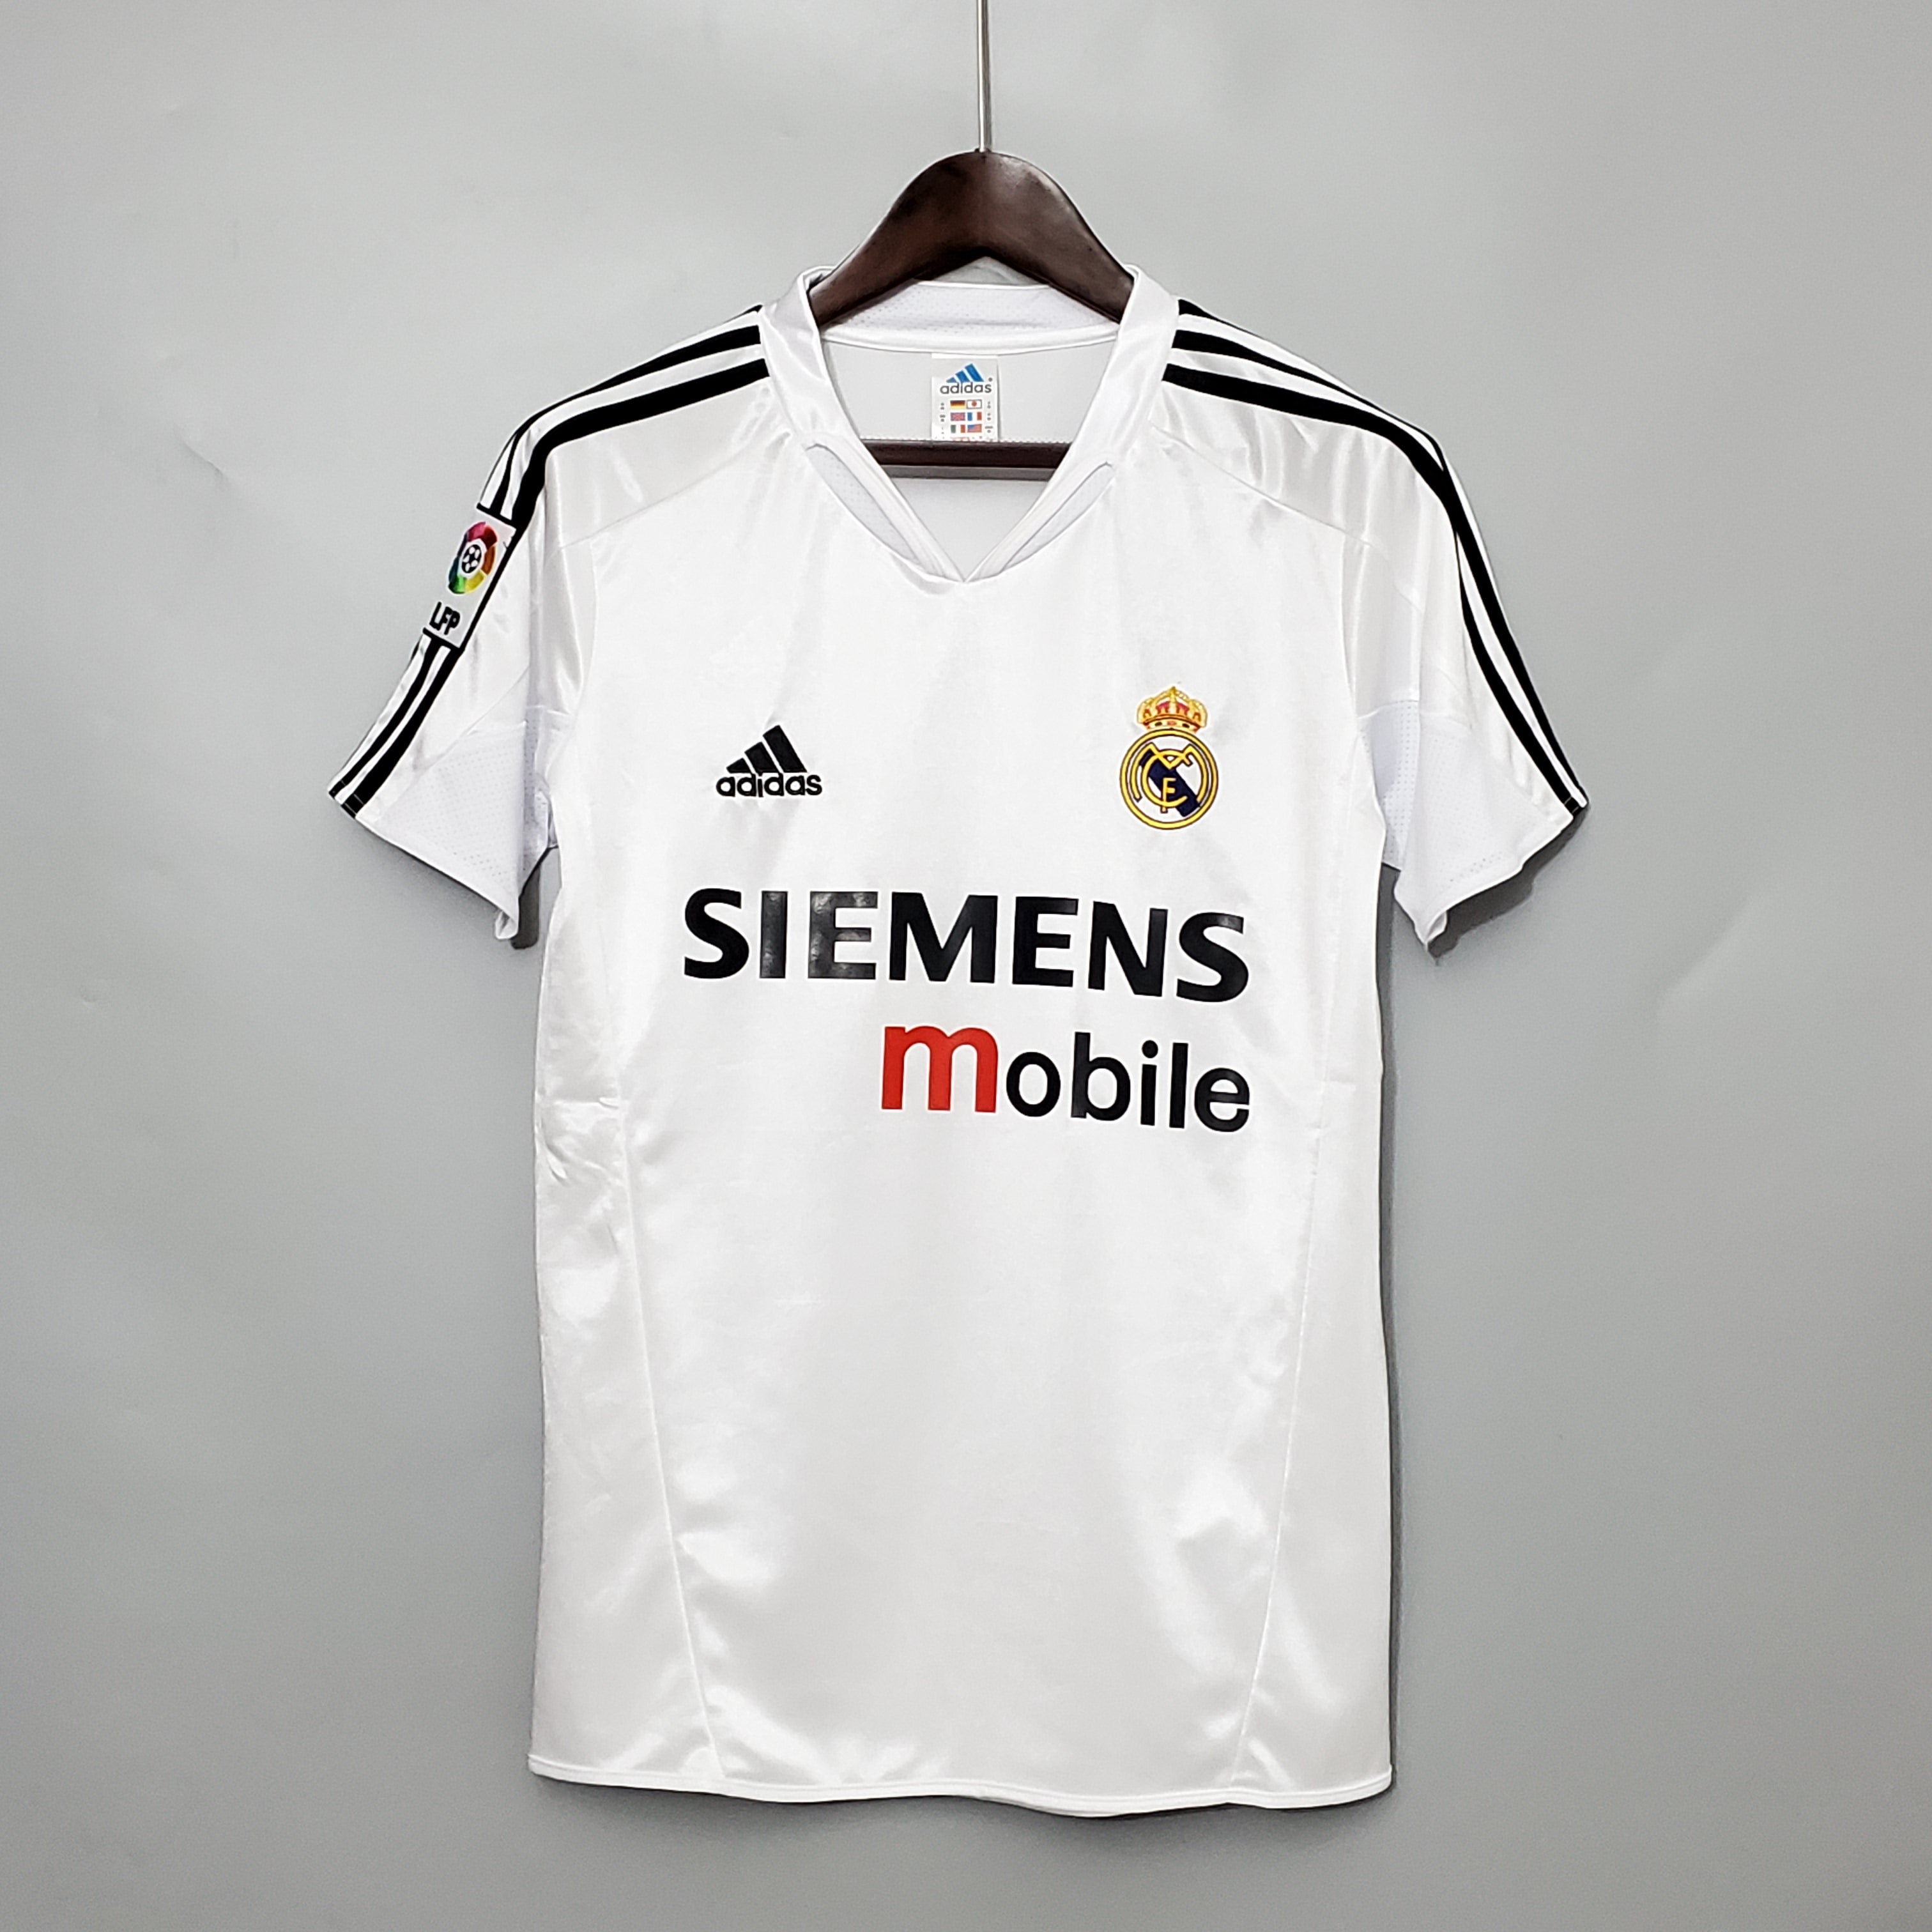 04-05 REAL MADRID home